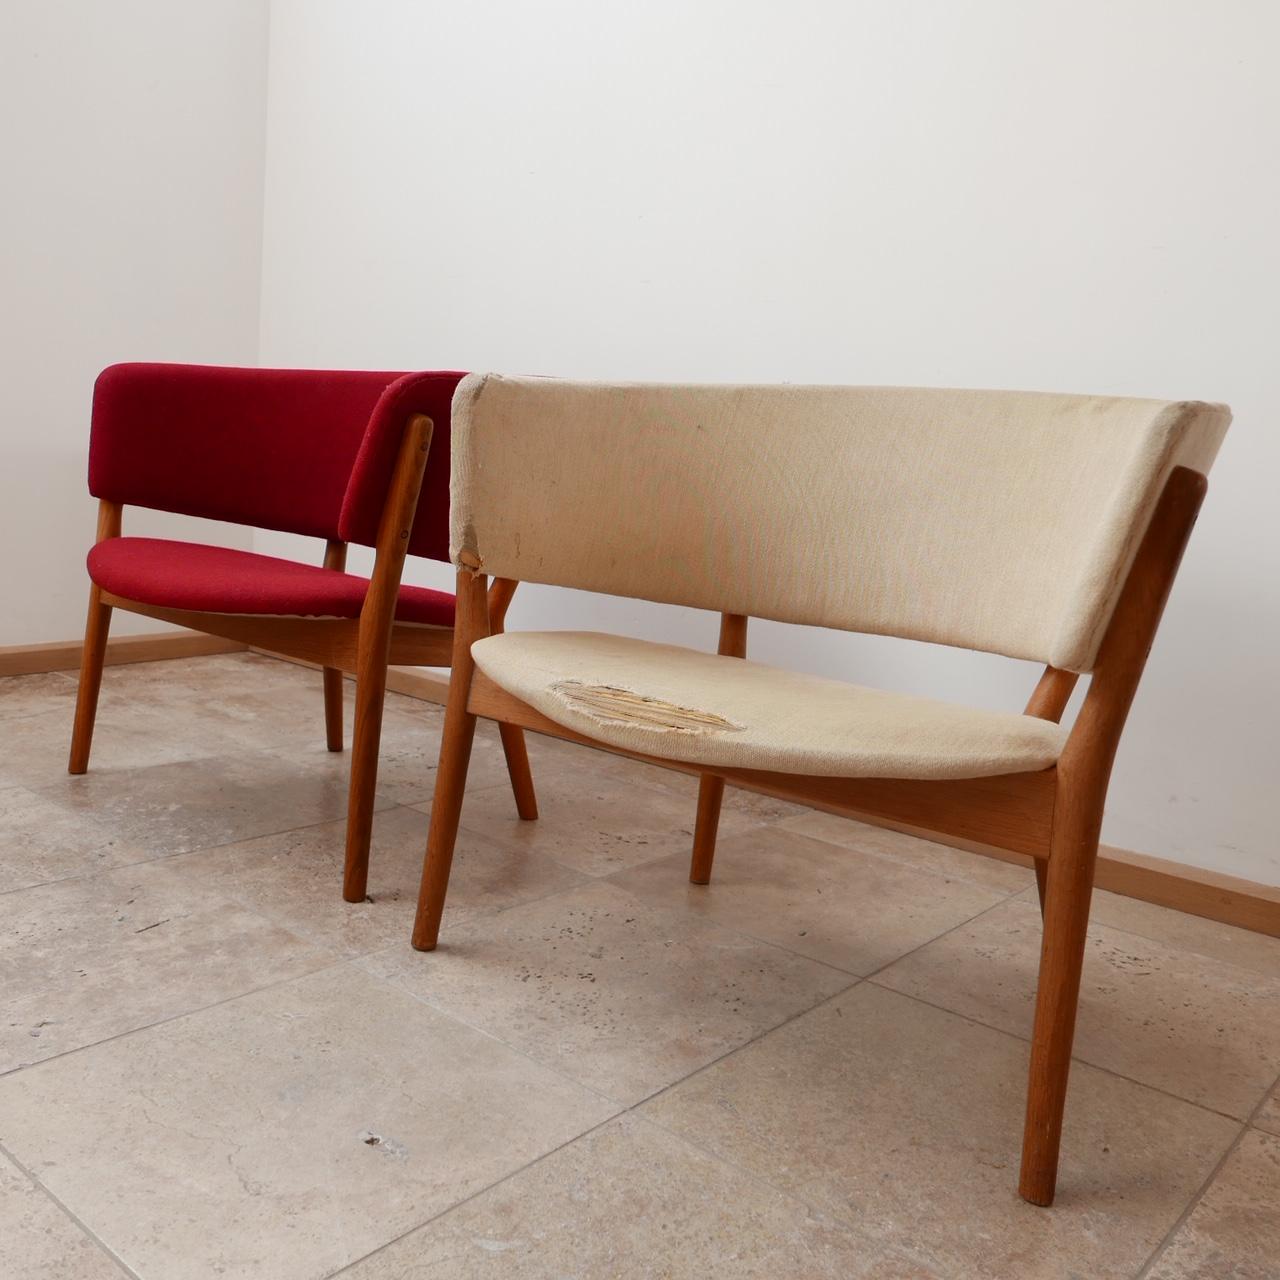 Wildly stylish armchairs by Nanna Ditzel. 

ND83 model. 

Designed by Ditzel in 1952, manufactured by Søren Willadsen, Denmark

Denmark, c1950s. 

A wide open lounge chair that is very comfy and a design classic. 

Oak frames, the red